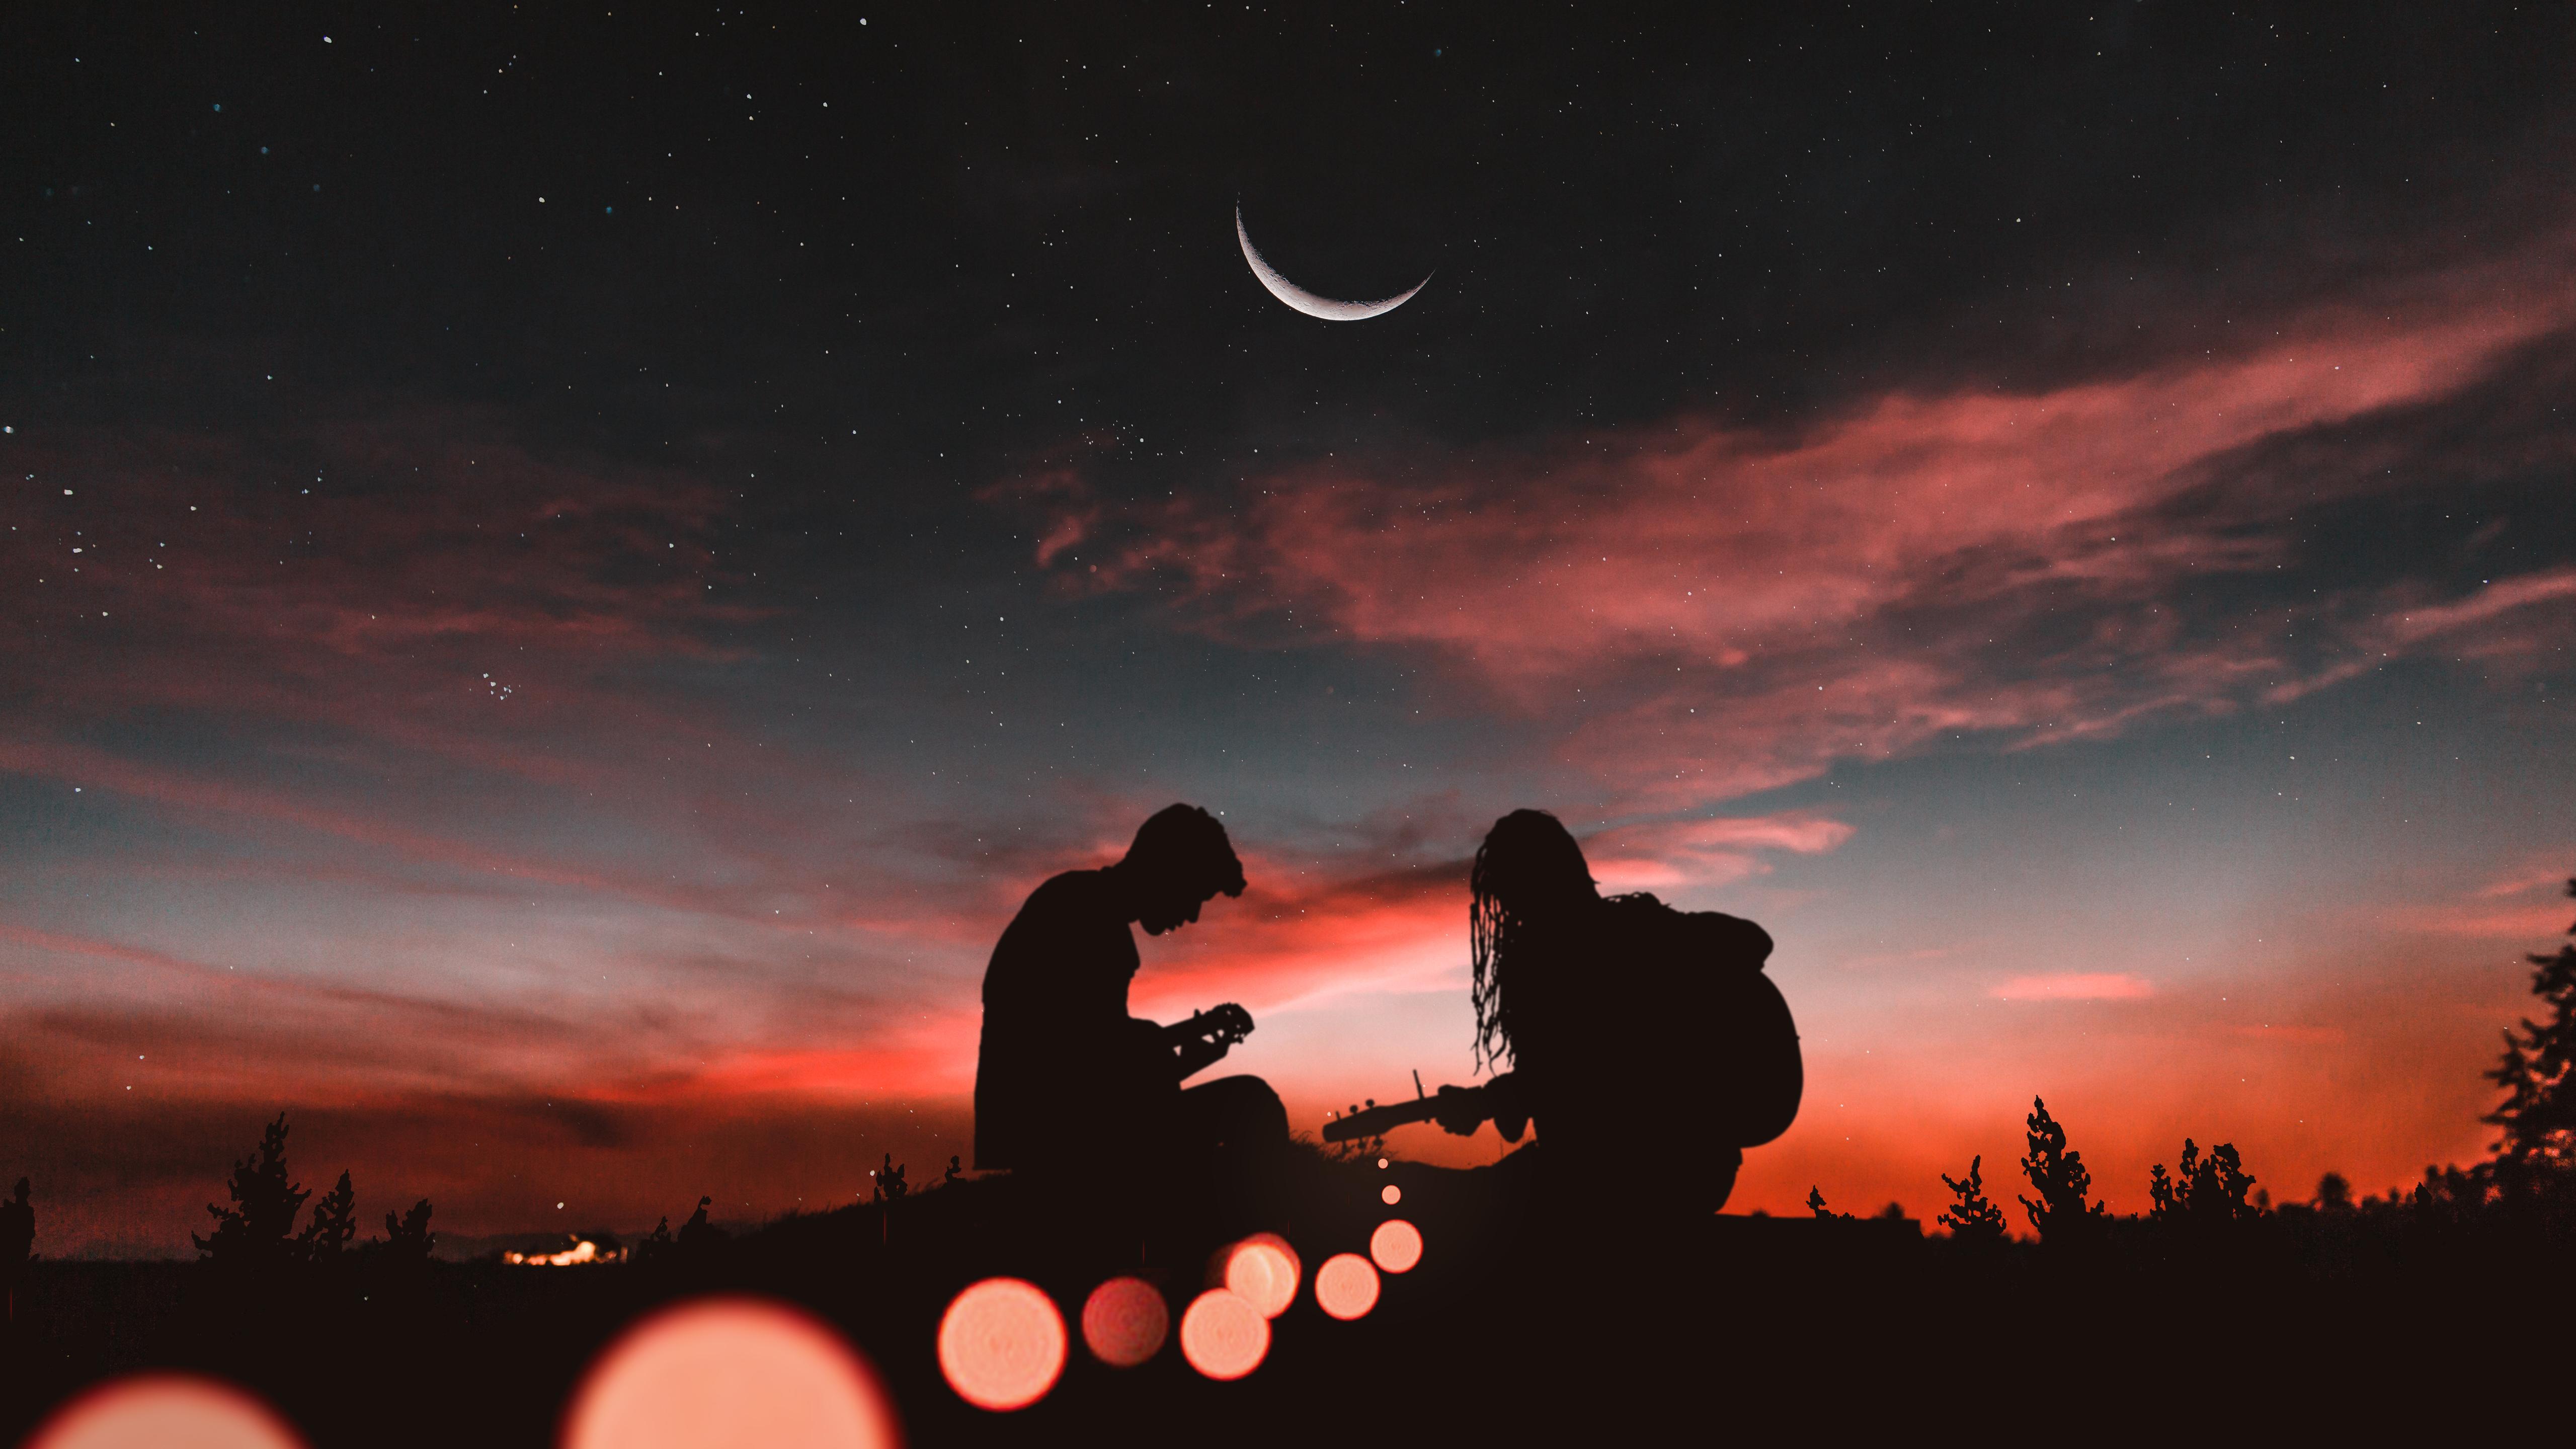 Wallpapers Couple, Playing guitar, Sunset, Half moon, Silhouette